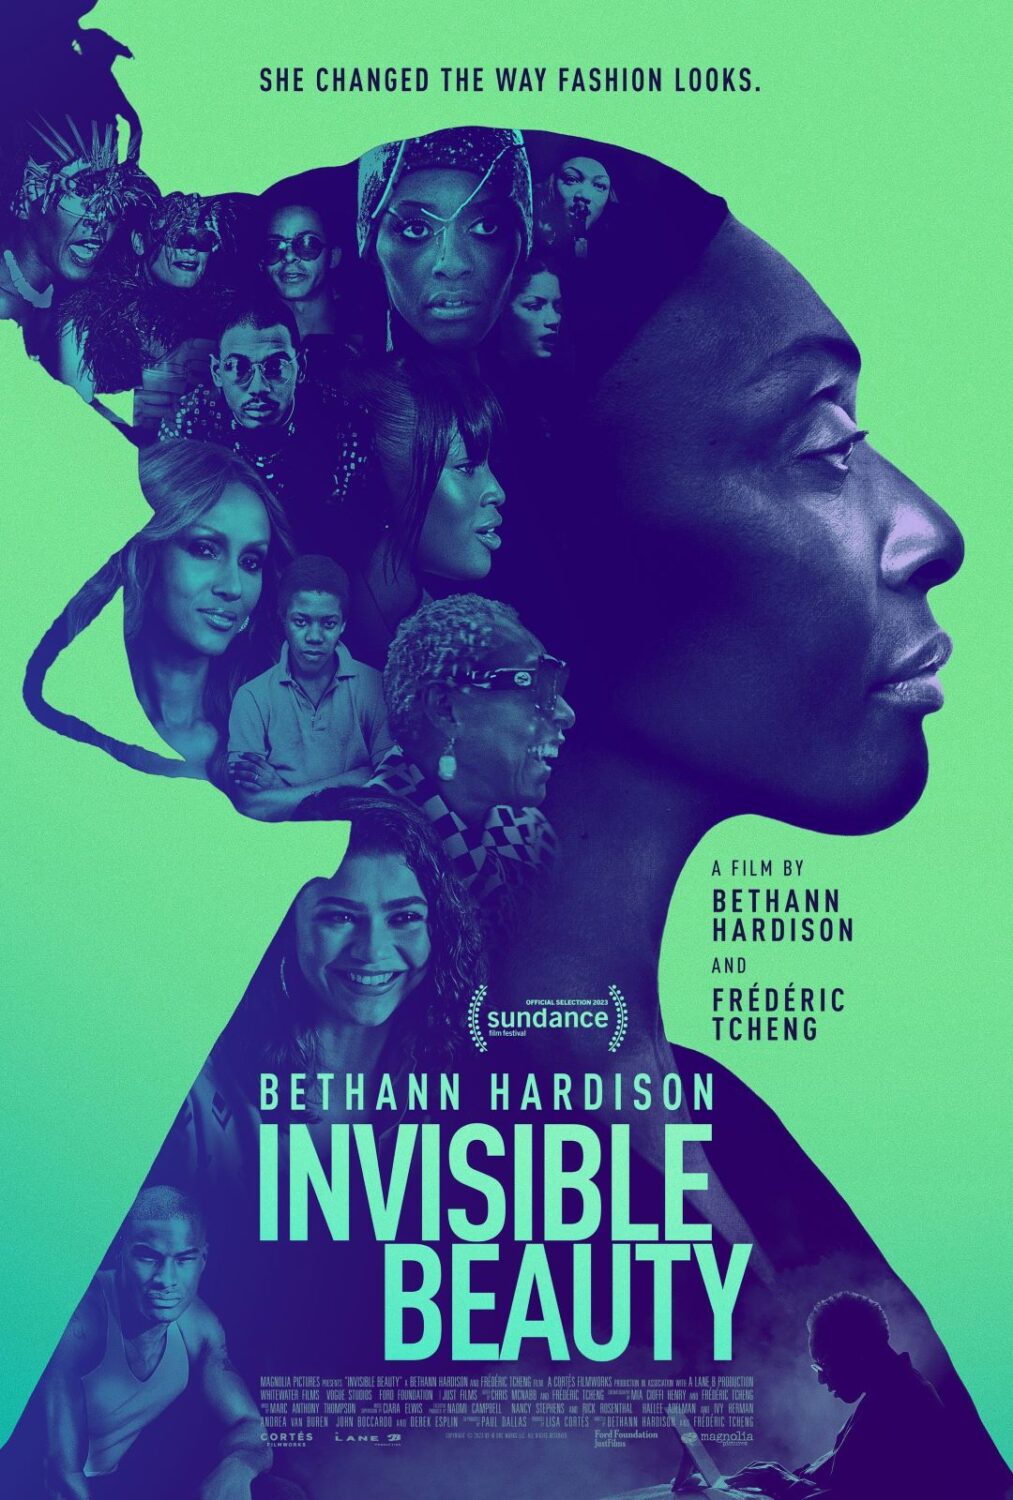 Bethann Hardion Invisible Beauty full poster